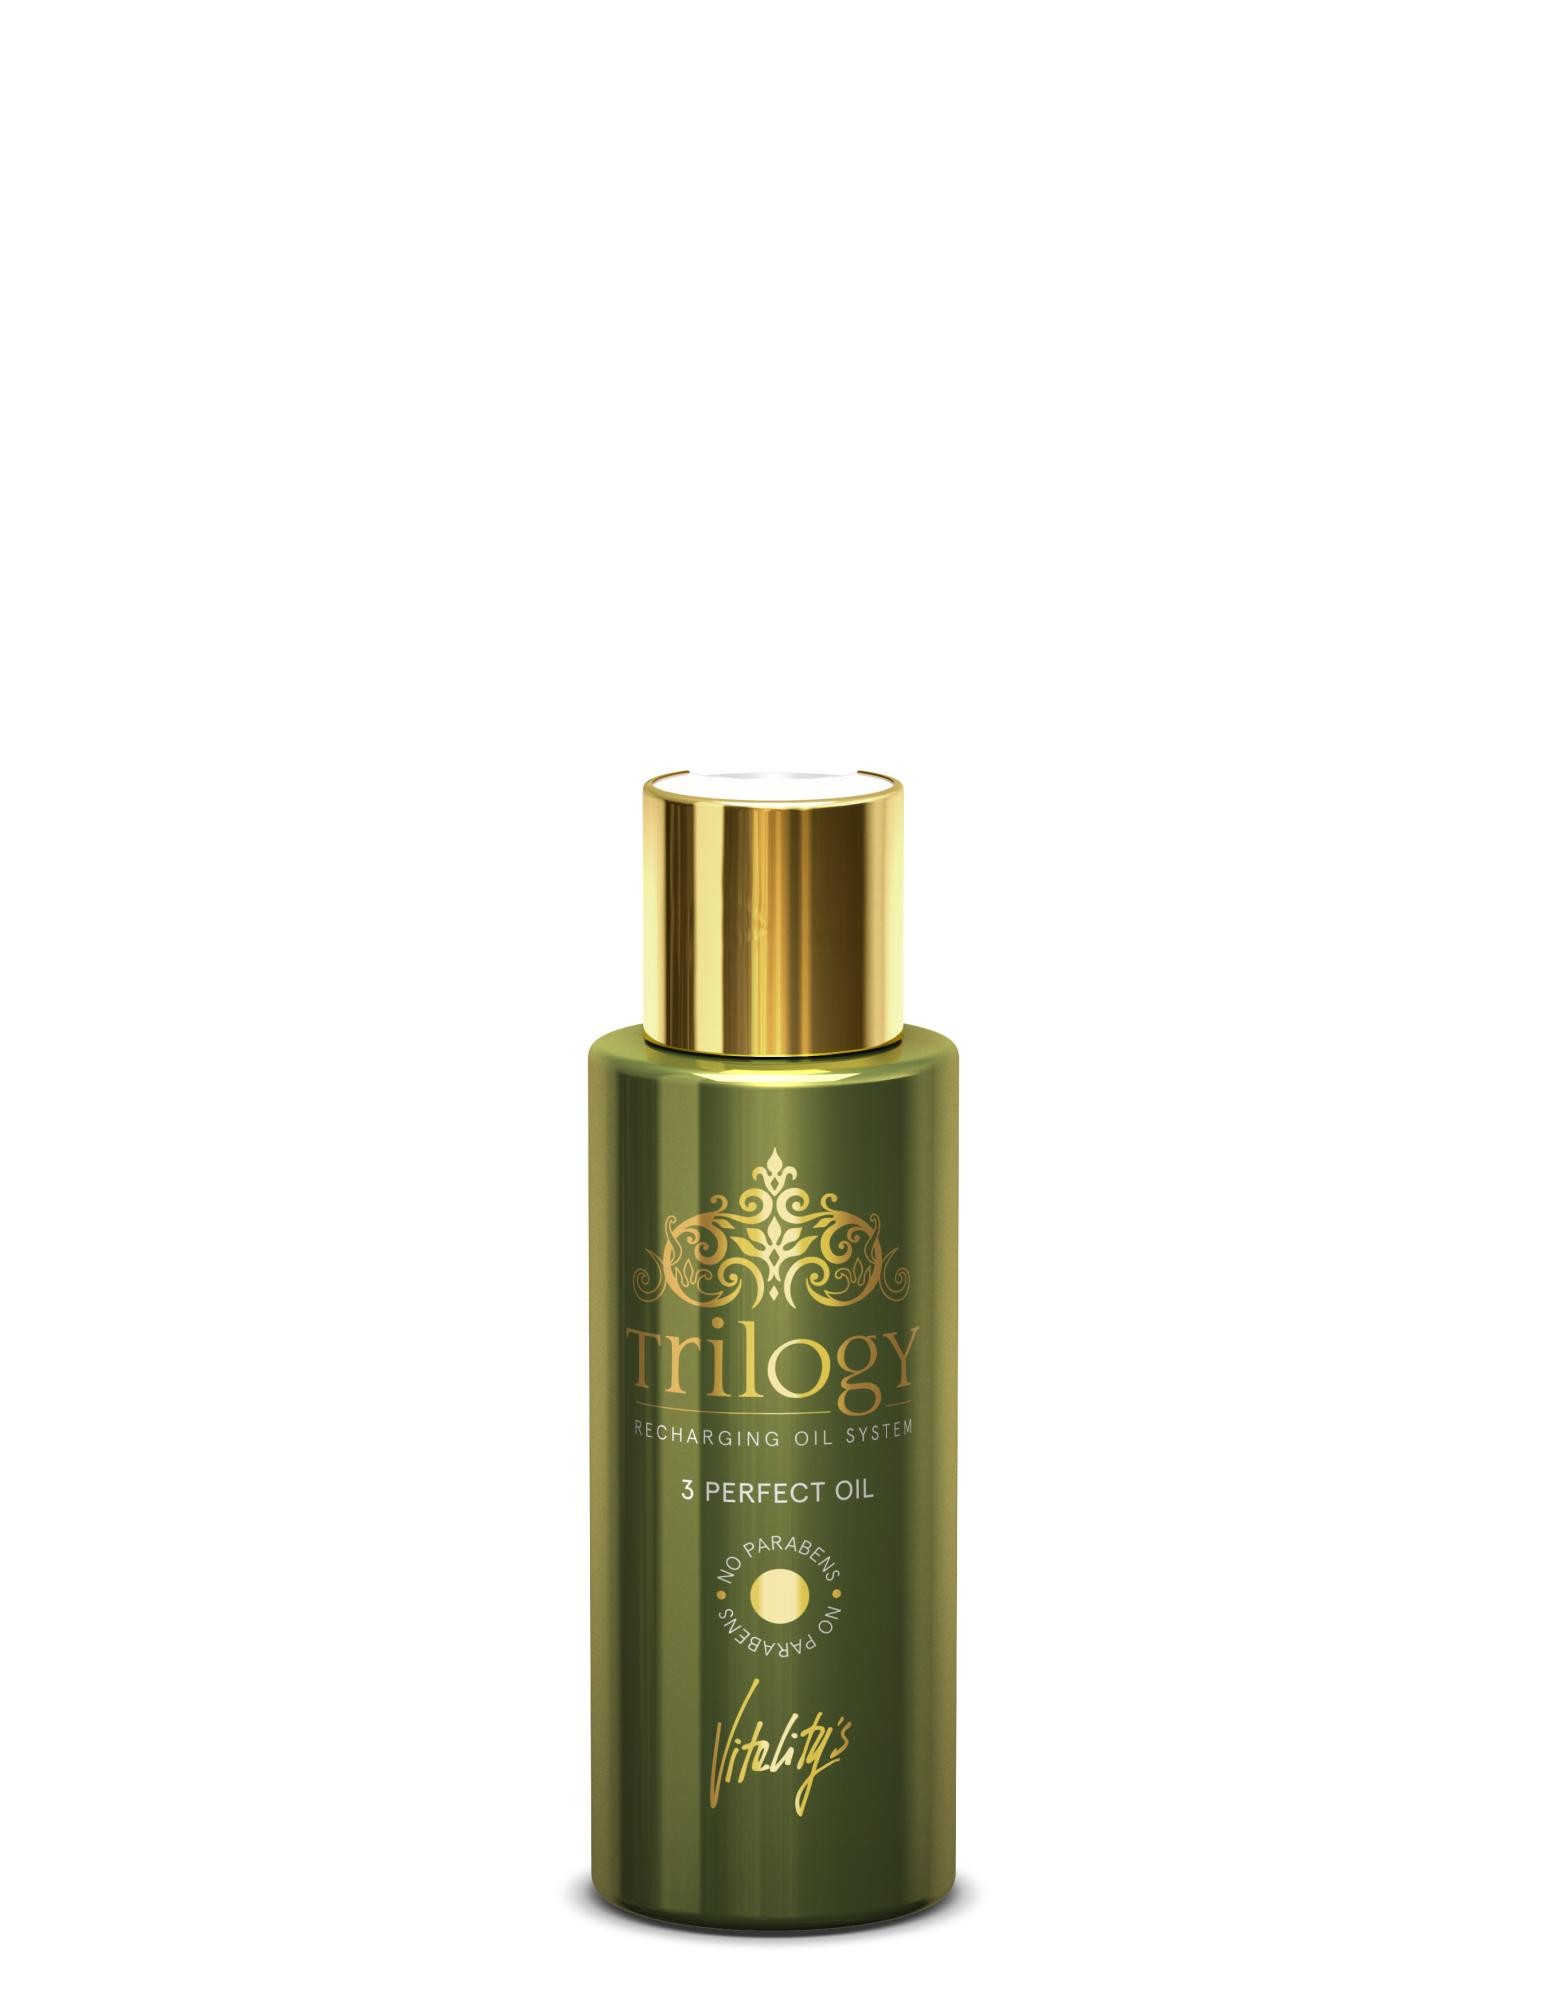 Vitality`s Trilogy 3 Perfect oil 100 ml